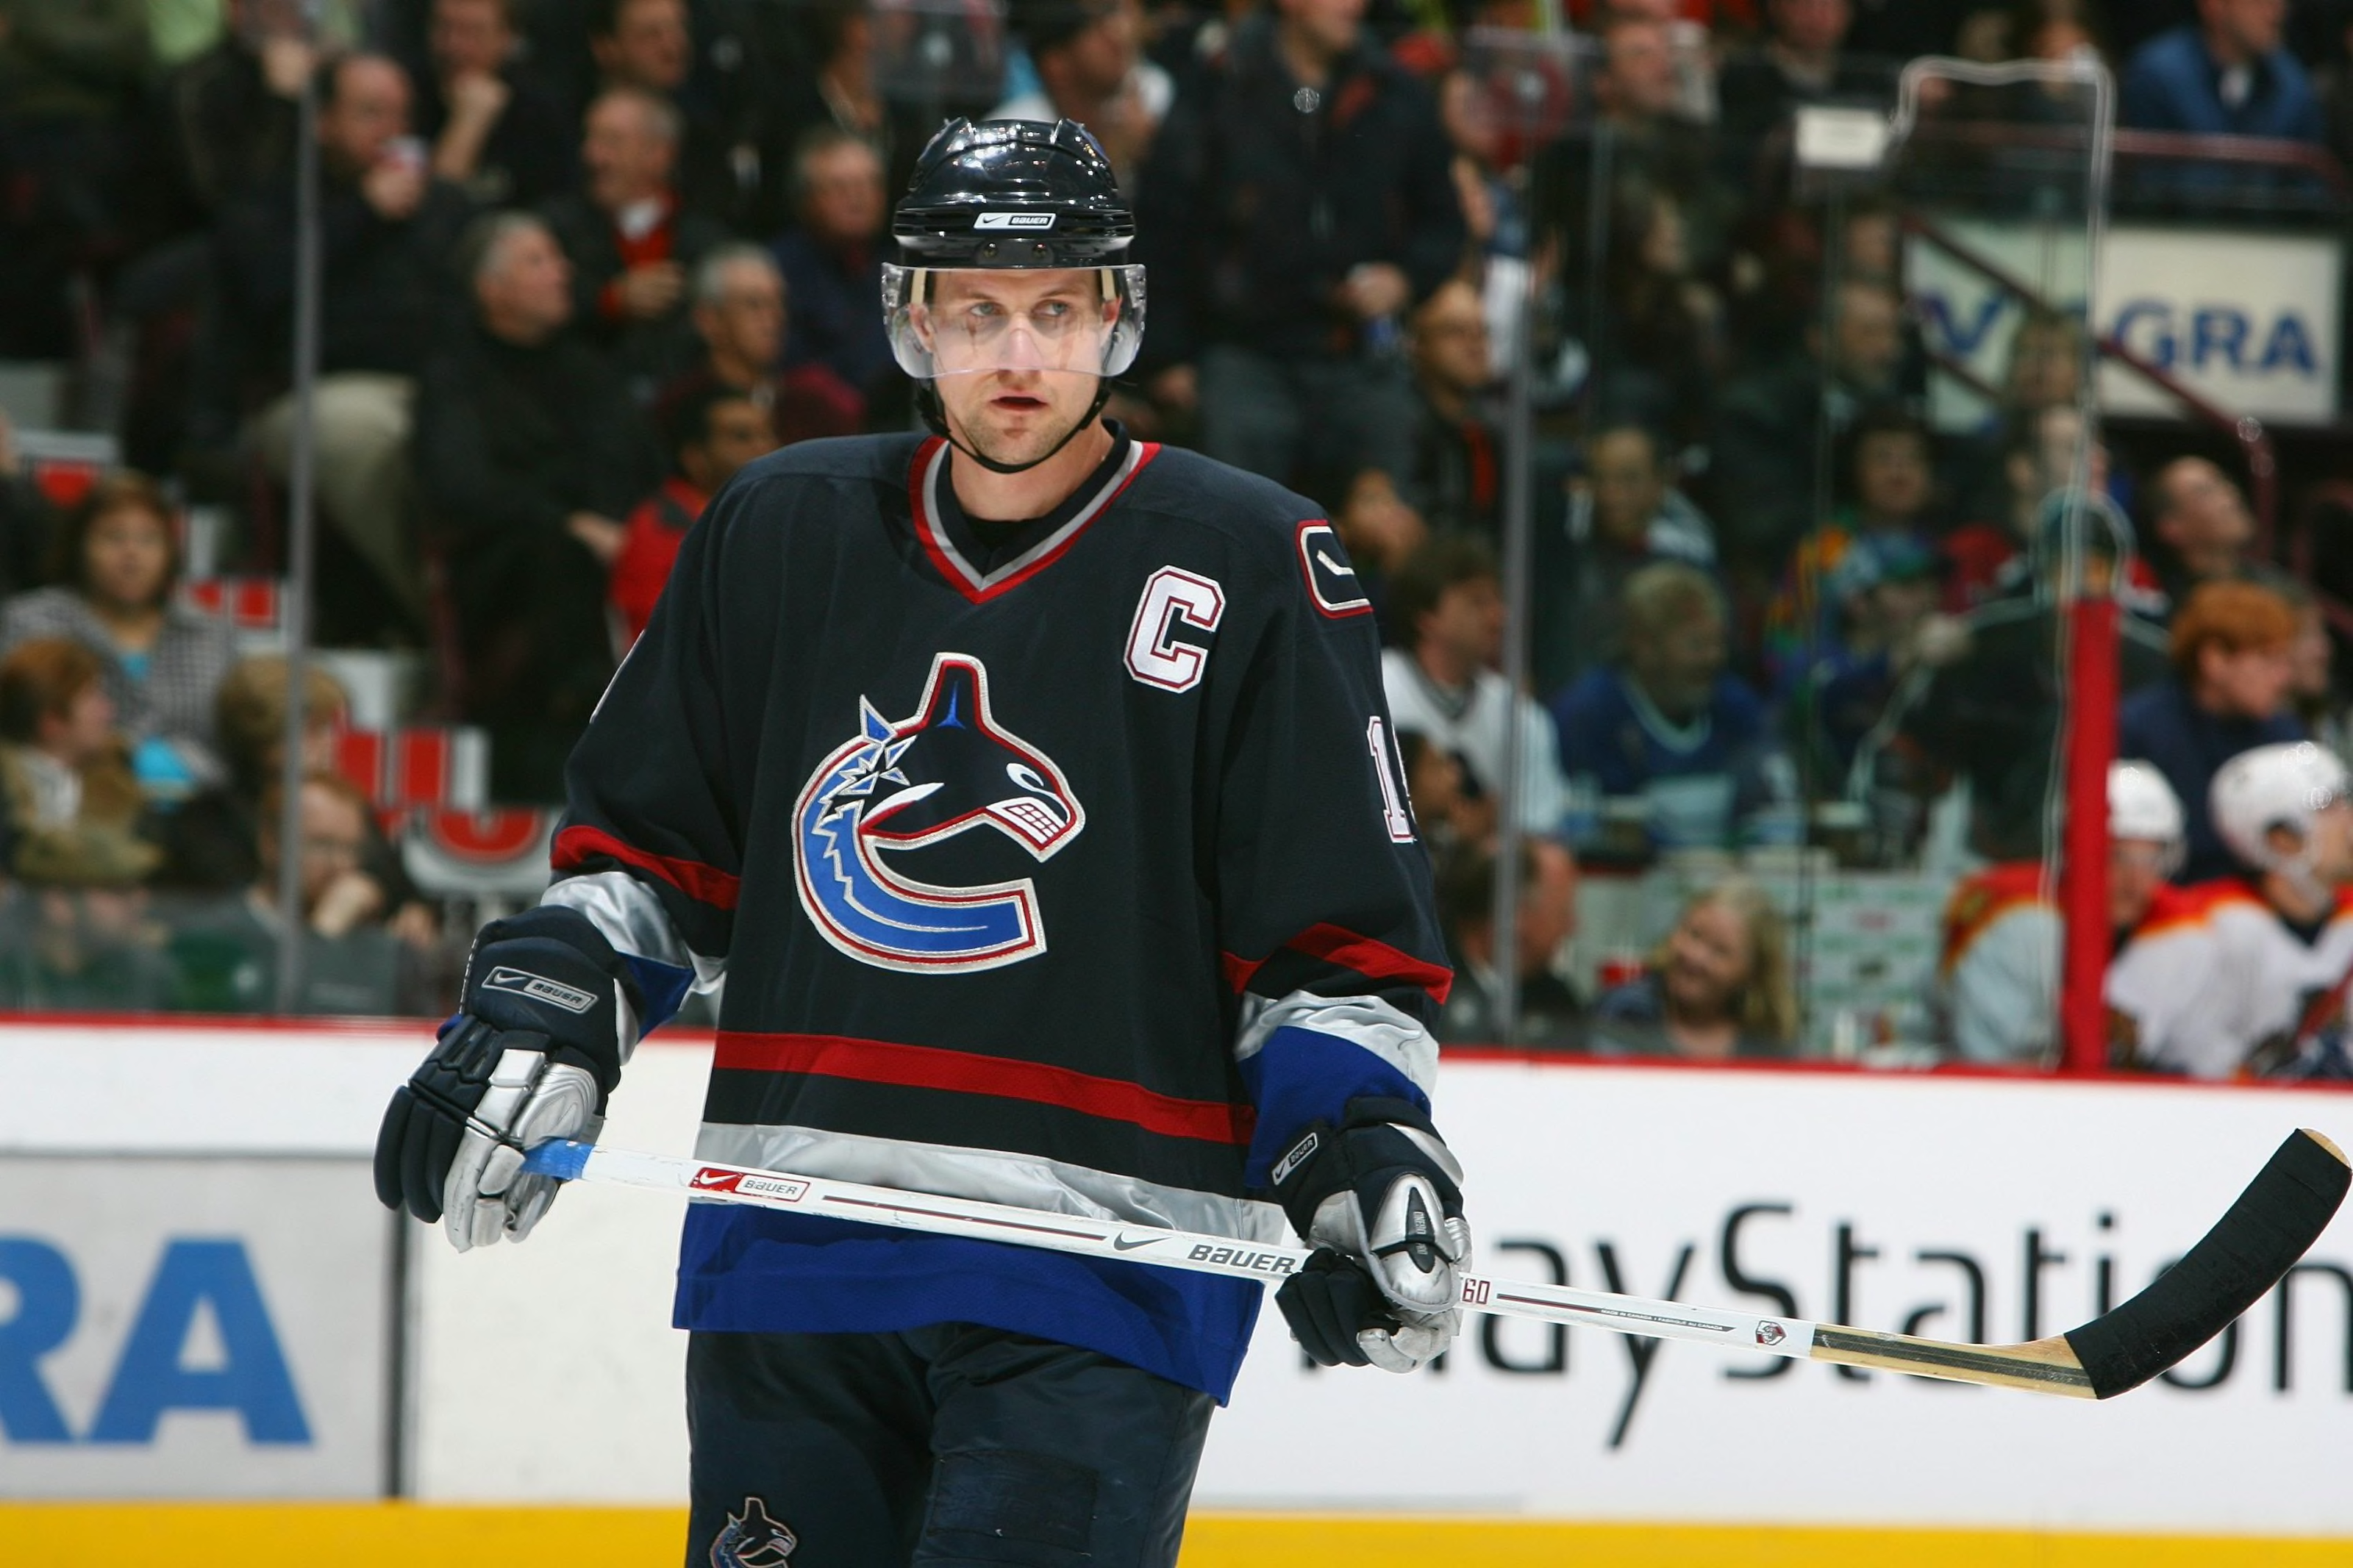 The jersey of former Colorado Avalanche player Peter Forsberg is News  Photo - Getty Images